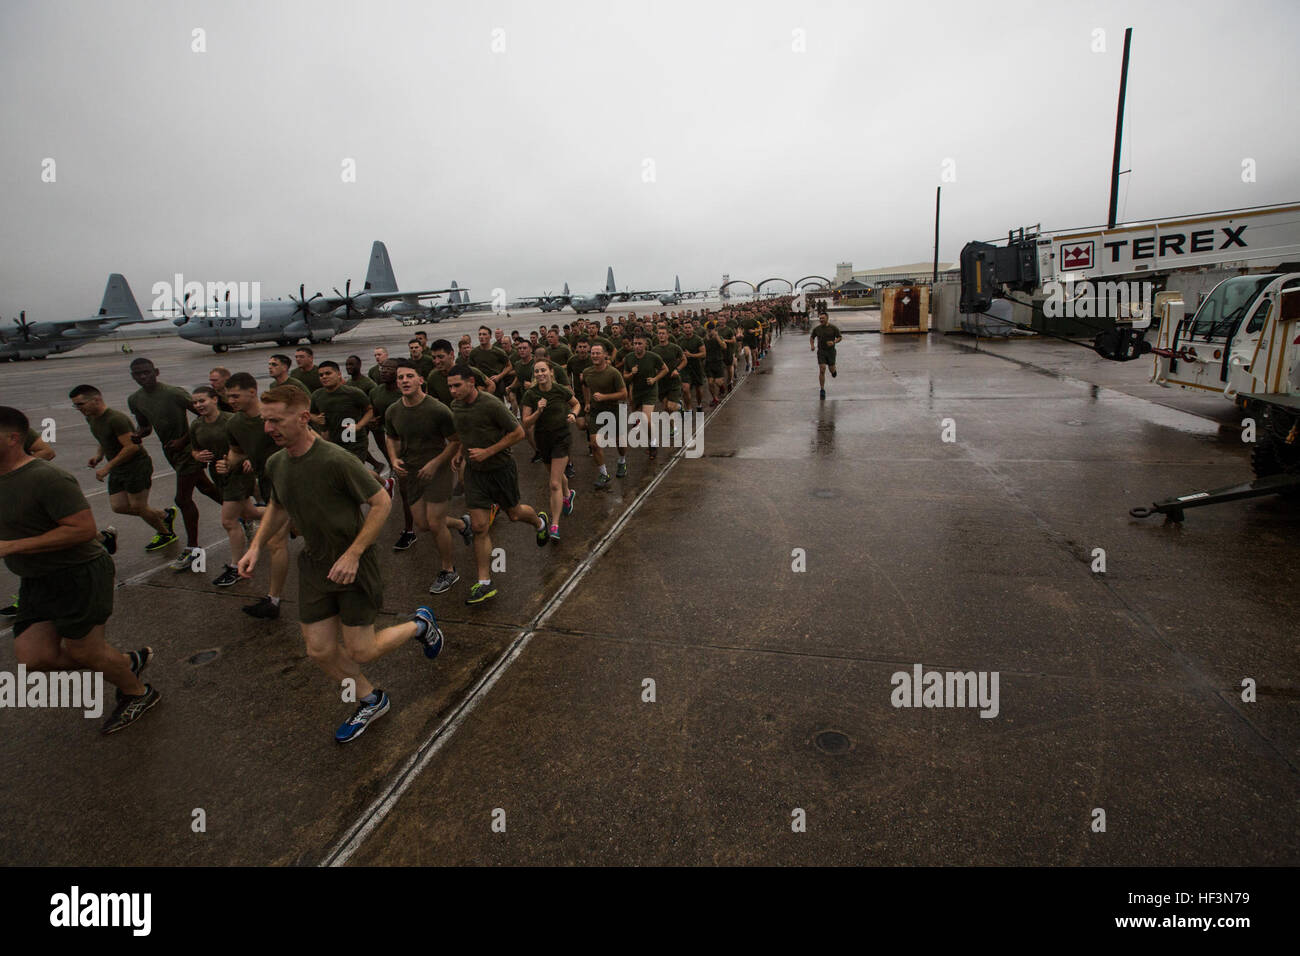 U.S. Marines and Sailors assigned to 2nd Marine Aircraft Wing participate in a formation run on Marine Corps Air Station Cherry Point, N.C., Nov. 9, 2015. The run was conducted in celebration of the Marine Corps' 240th Birthday. (U.S. Marine Corps photo by Lance Cpl. Jered T. Stone/Released) 2d MAW Birthday Run 151109-M-WP334-086 Stock Photo